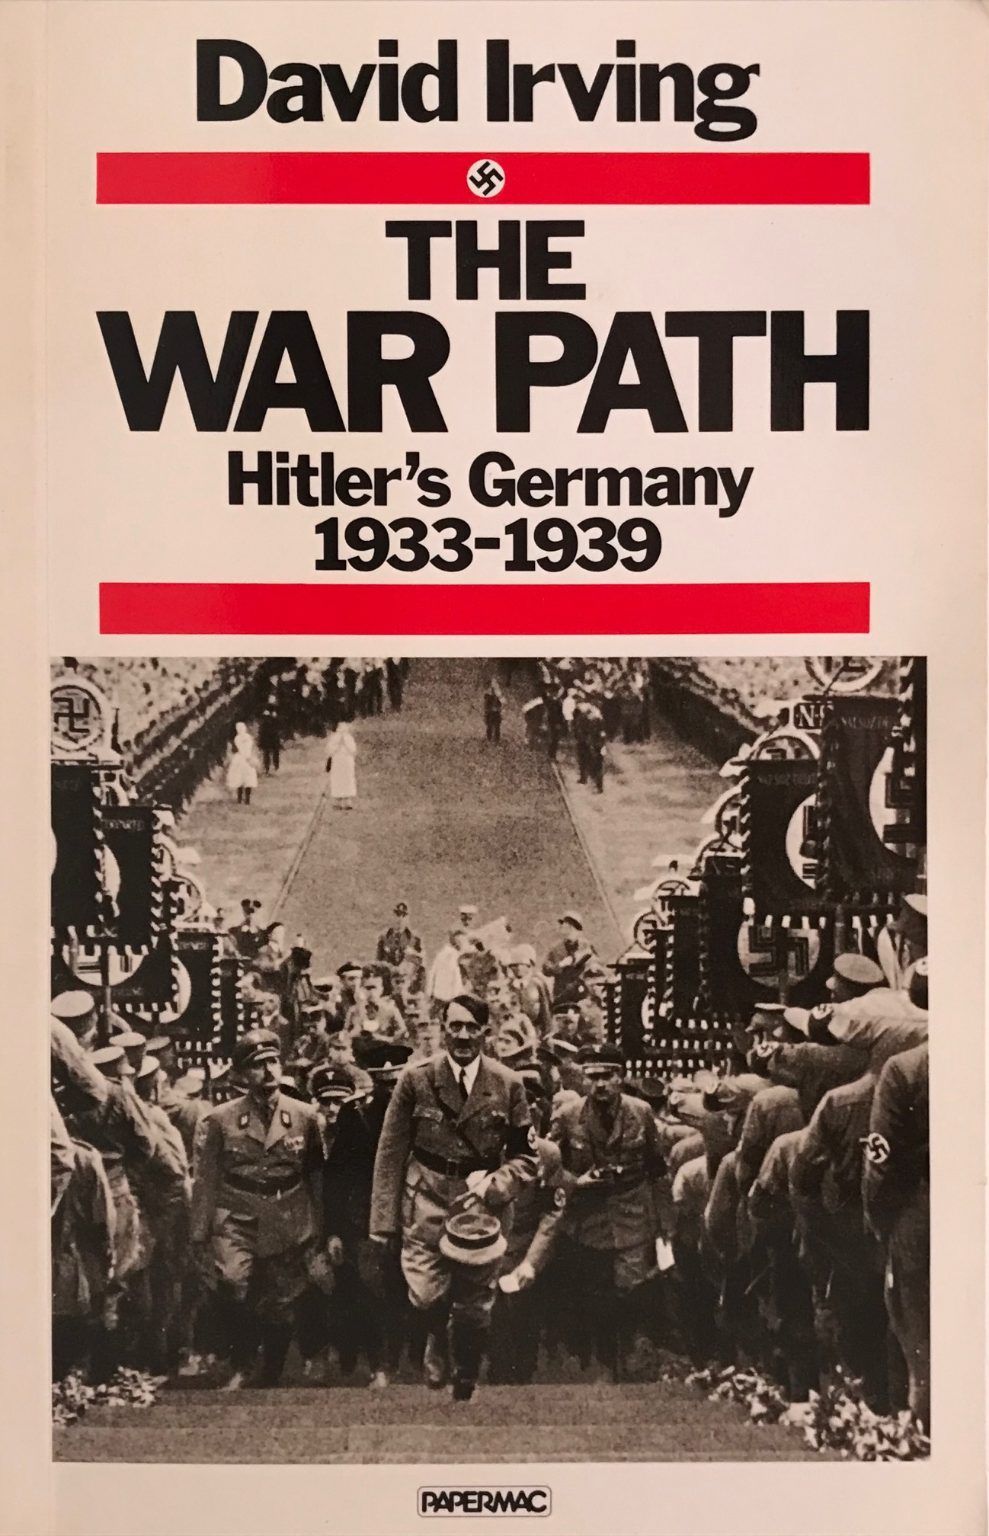 THE WAR PATH: Hitler's Germany 1933-1939